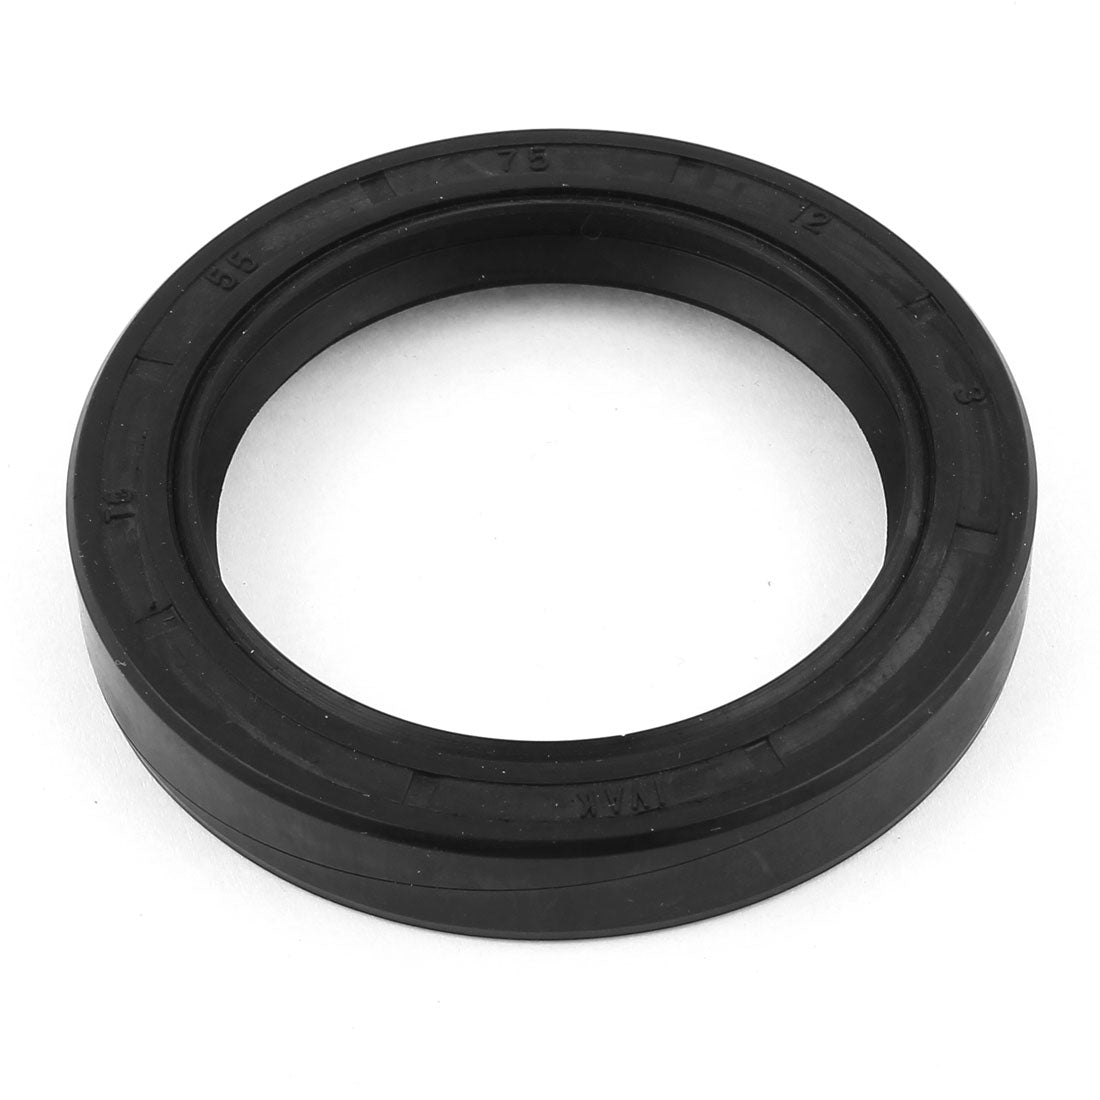 Uxcell Uxcell Machine Rubber Oil Seal Sealing Ring Gasket Washer Black 100mmx125mmx12mm